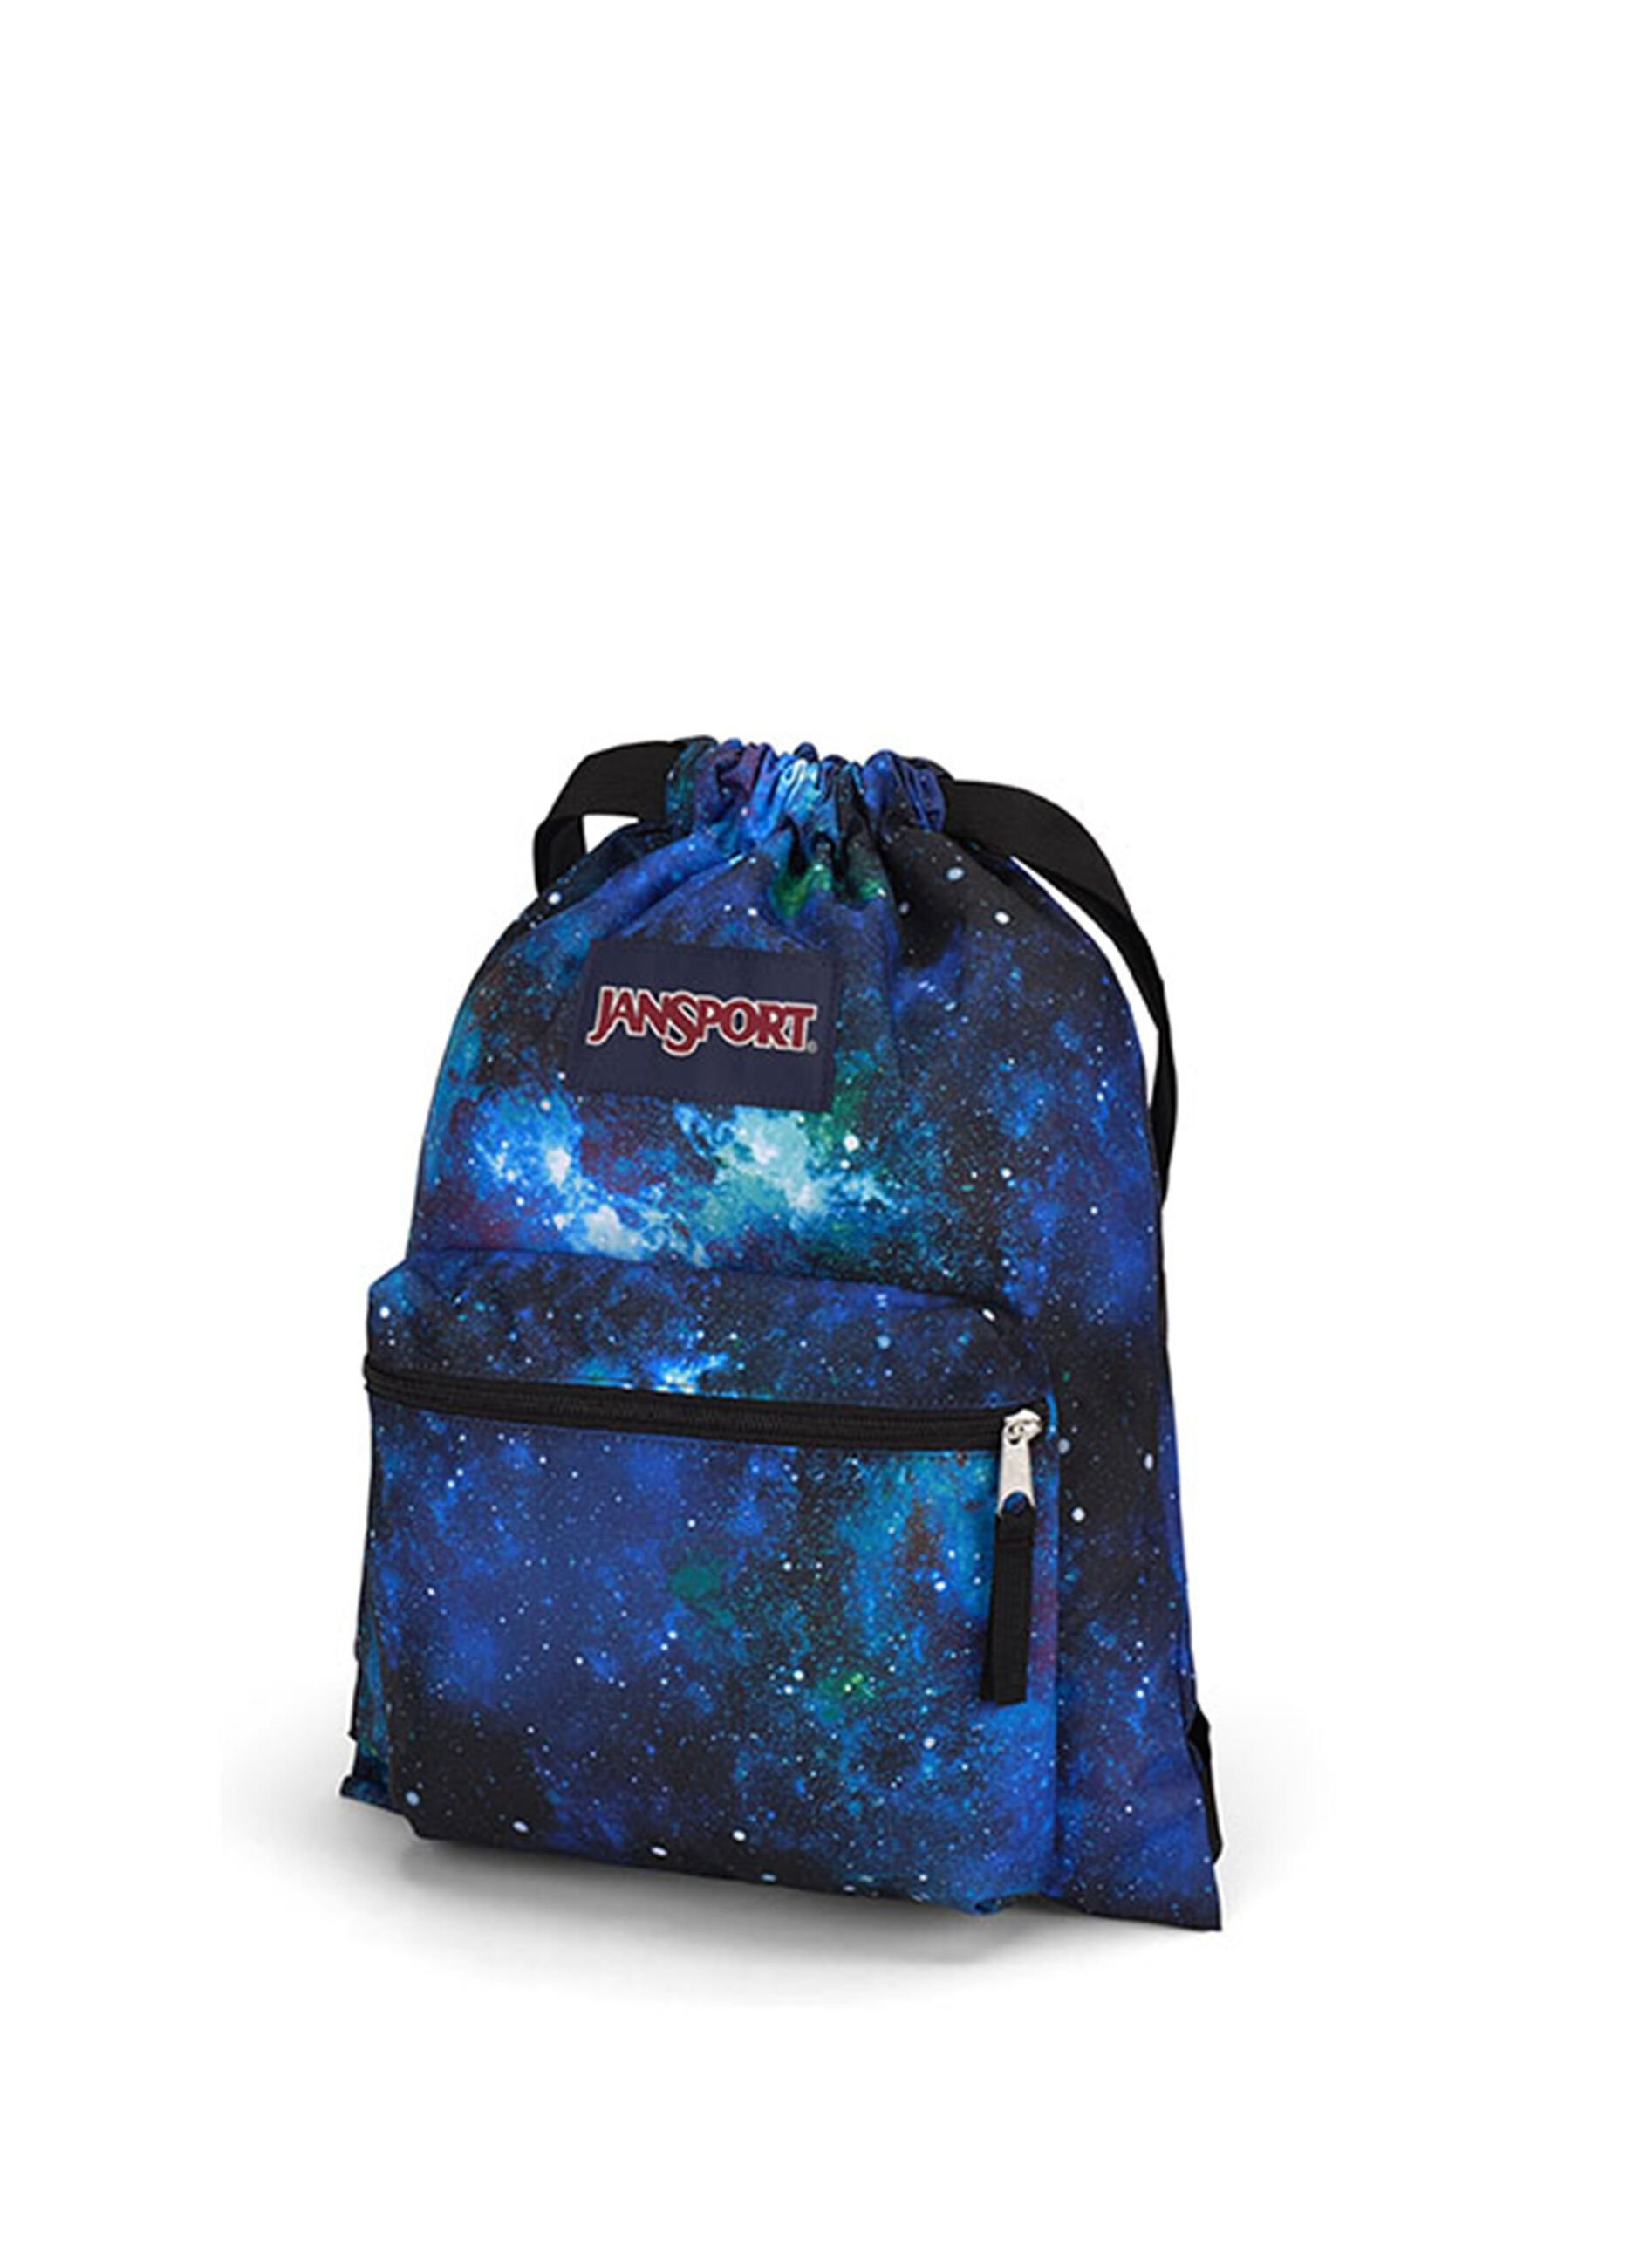 Draw sack backpack with Space Dust pattern